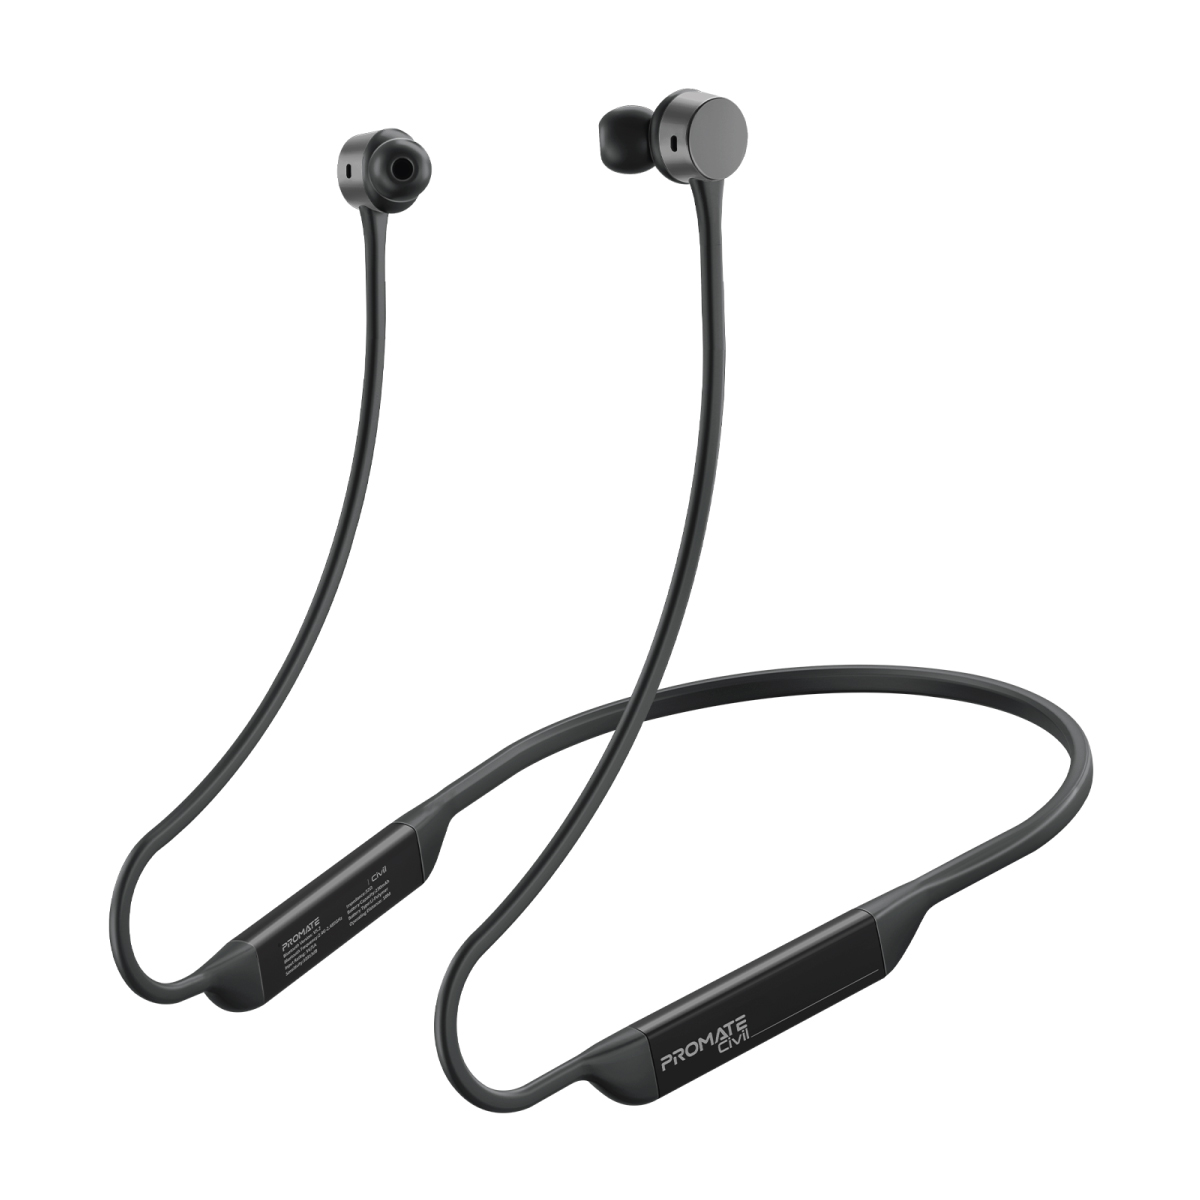 Promate Wireless Neckband Earphones, Hi-Fi Lightweight Wireless Bluetooth Earphones with Anti-Slip Liquid Silicone Neckband, Hall Switch Sensor, 24H Playtime and In-Line Controls for iPhone 14, Galaxy S23, Civil.BLACK